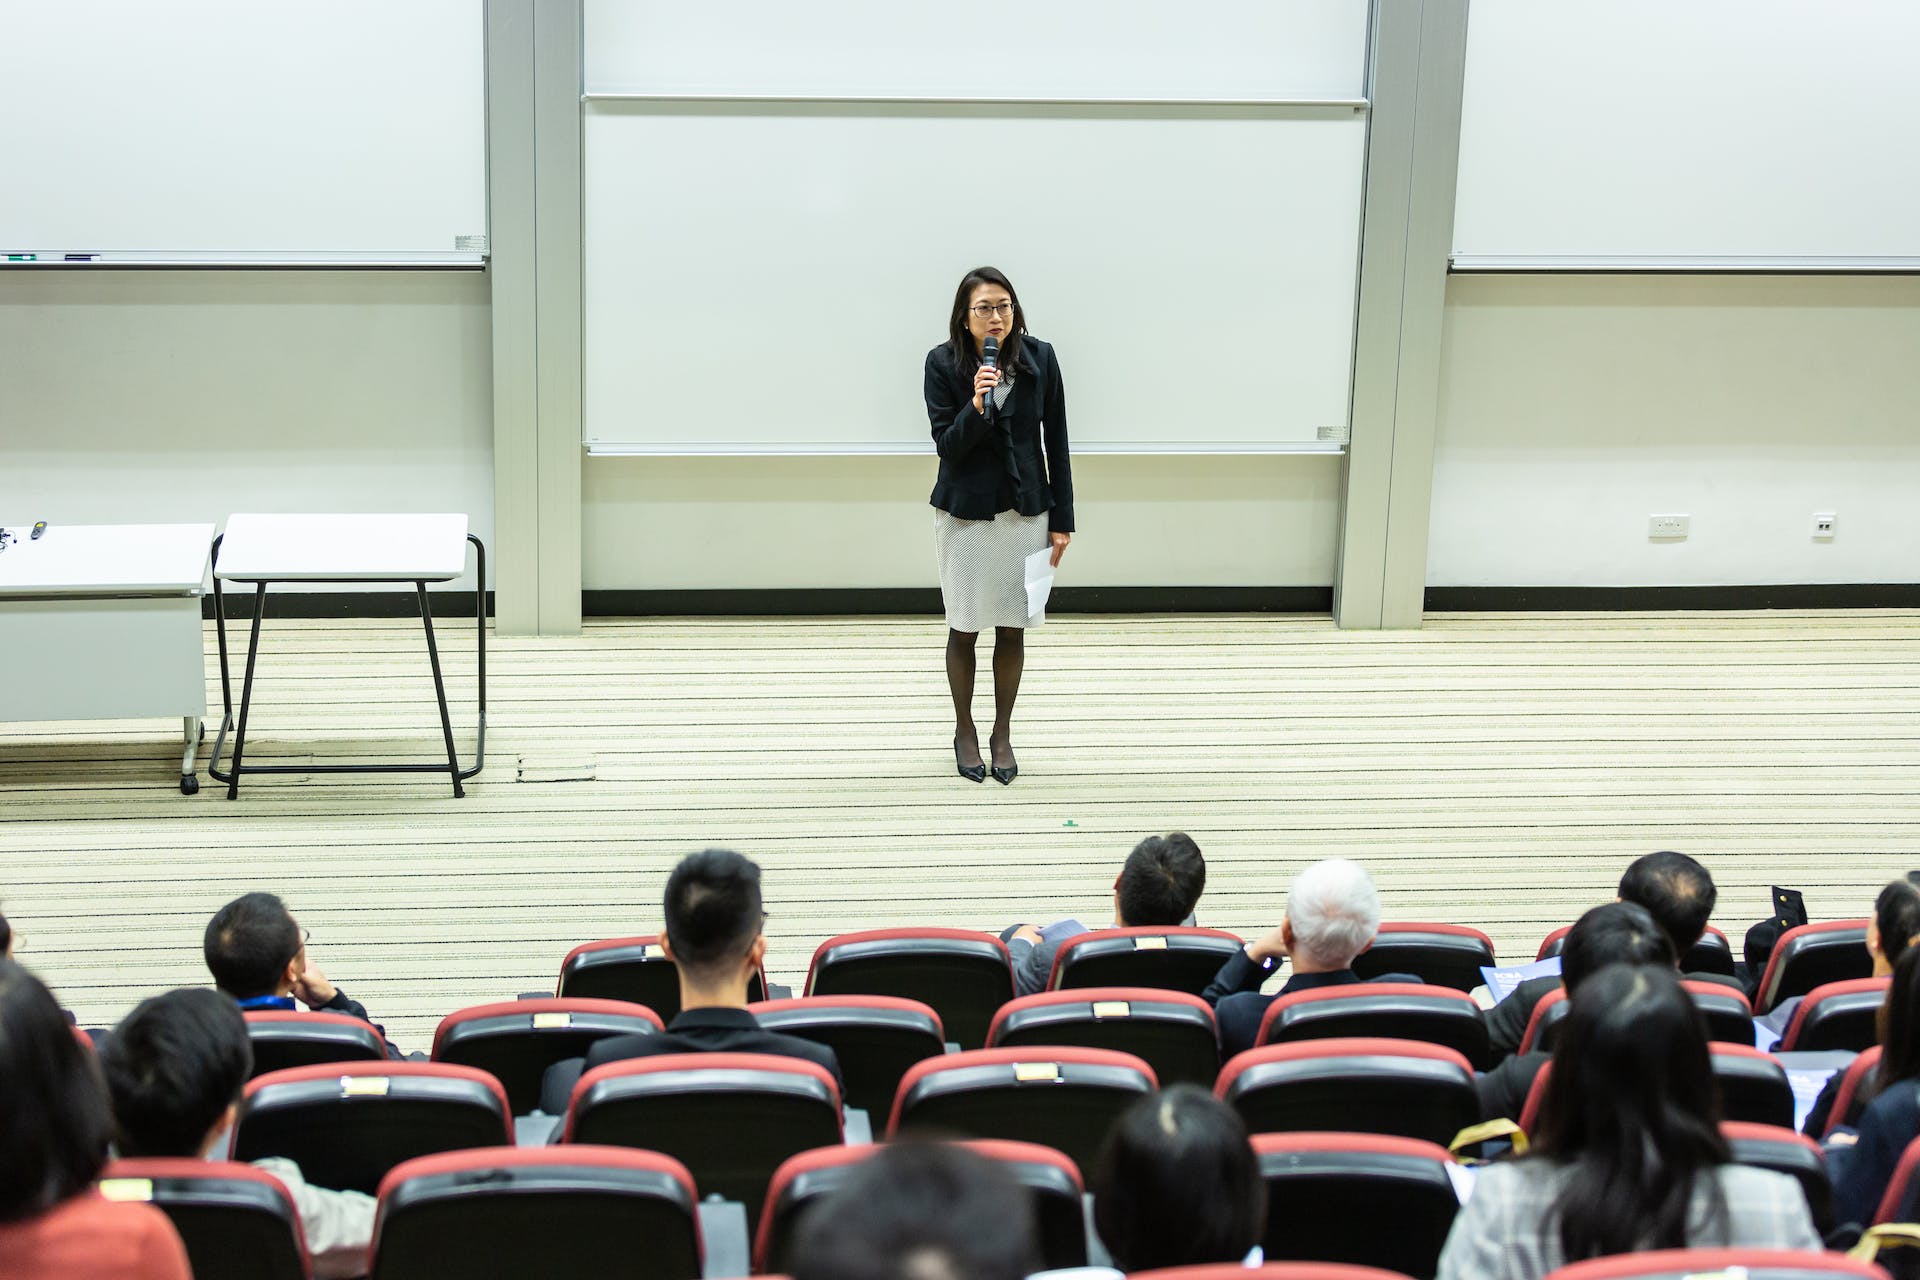 Woman giving a lecture. | Source: Pexels